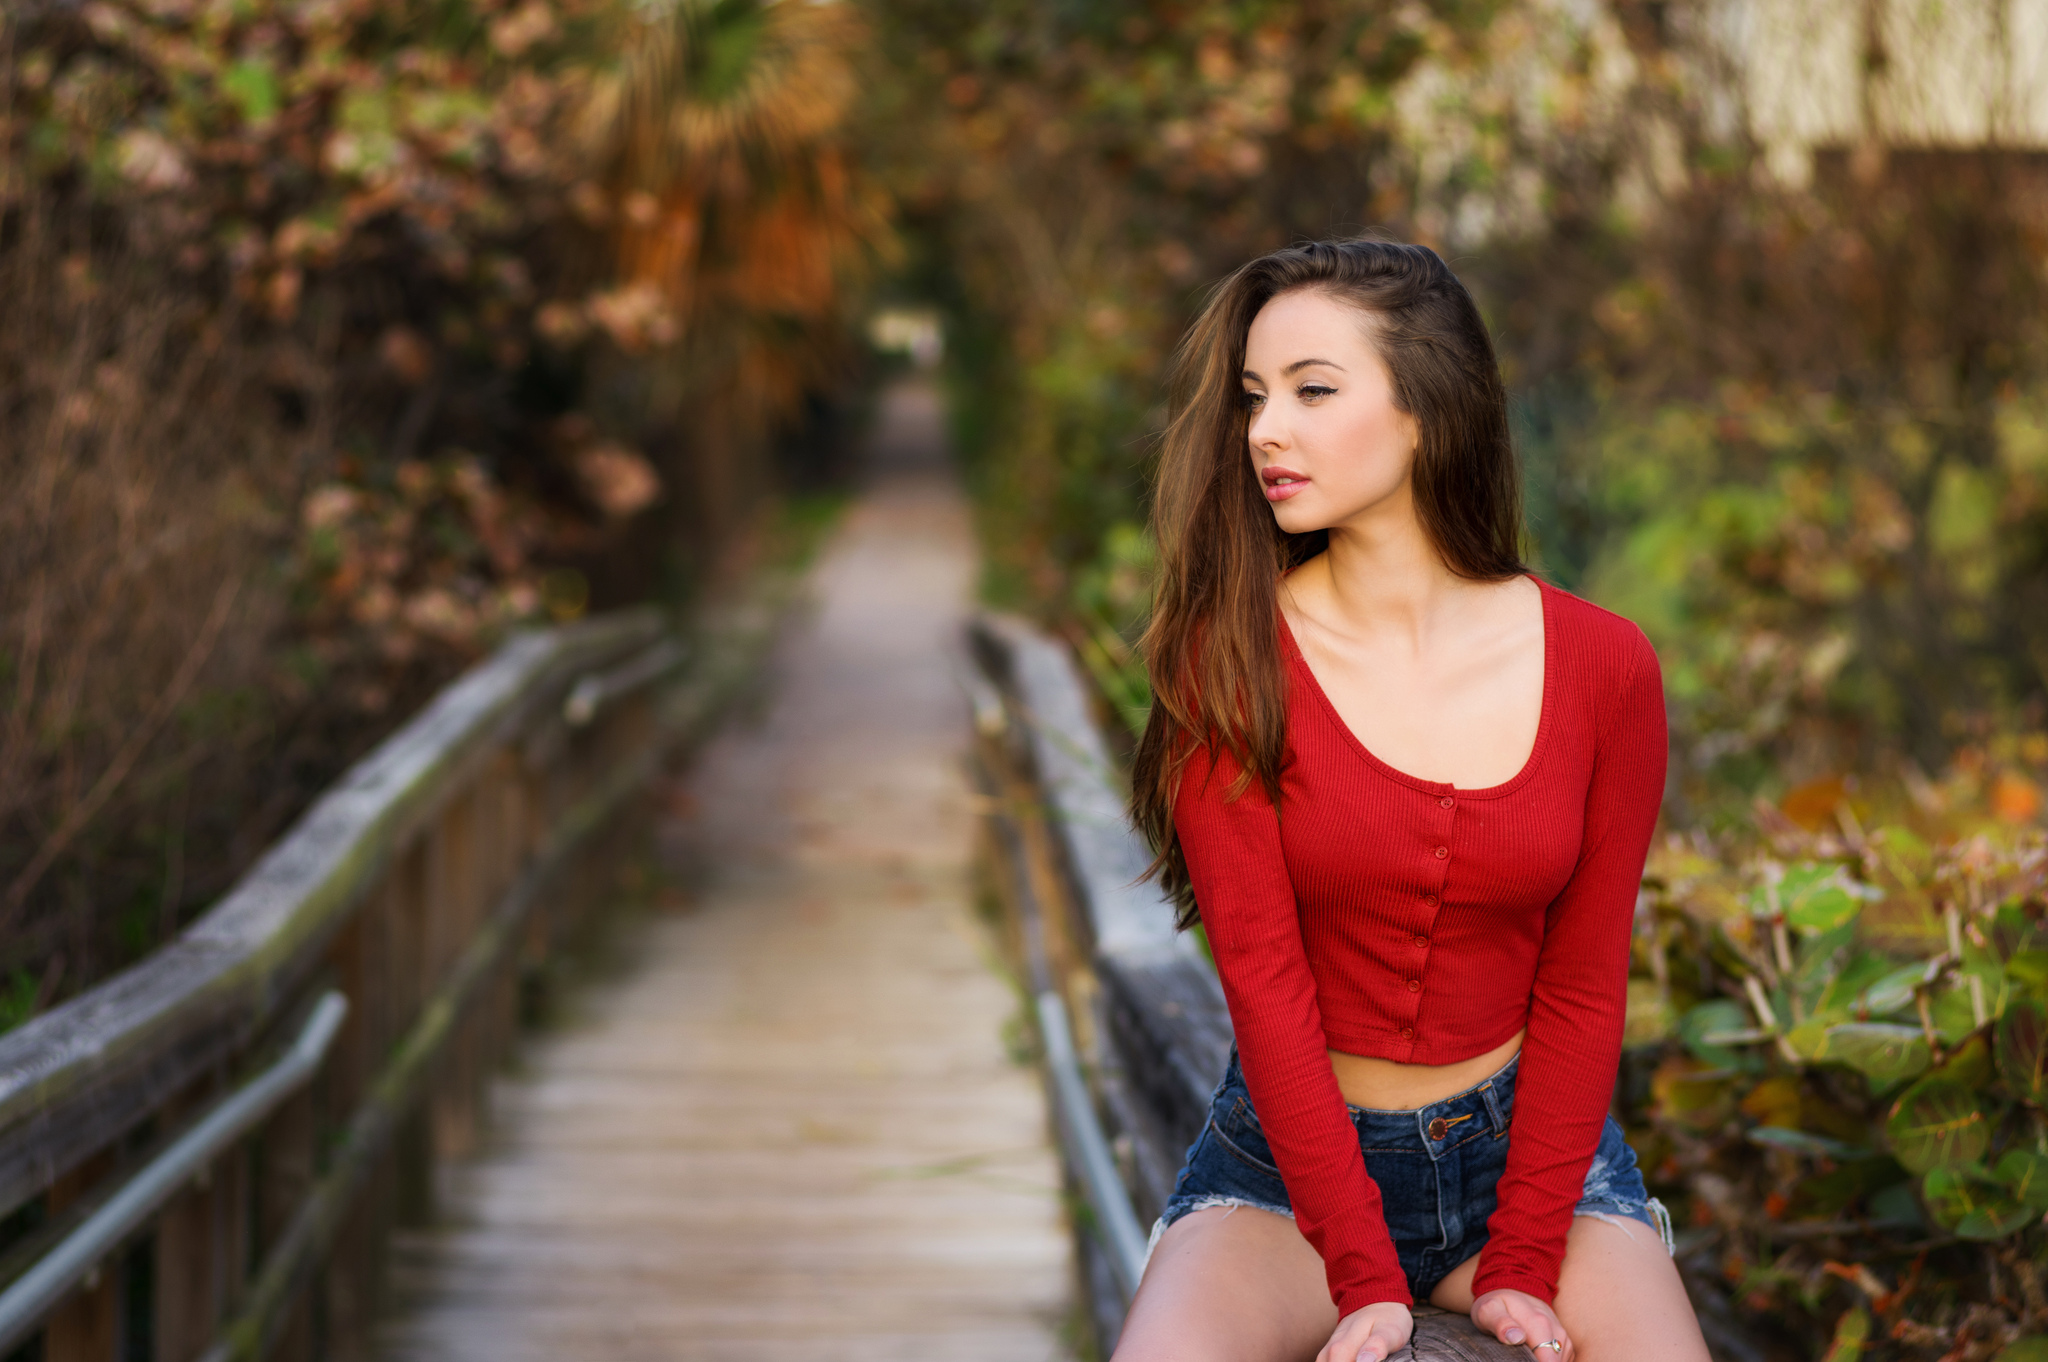 People 2048x1362 Theresa Grant model women outdoors women crop top jean shorts looking away red sweater brunette long hair sitting short shorts pale blue shorts